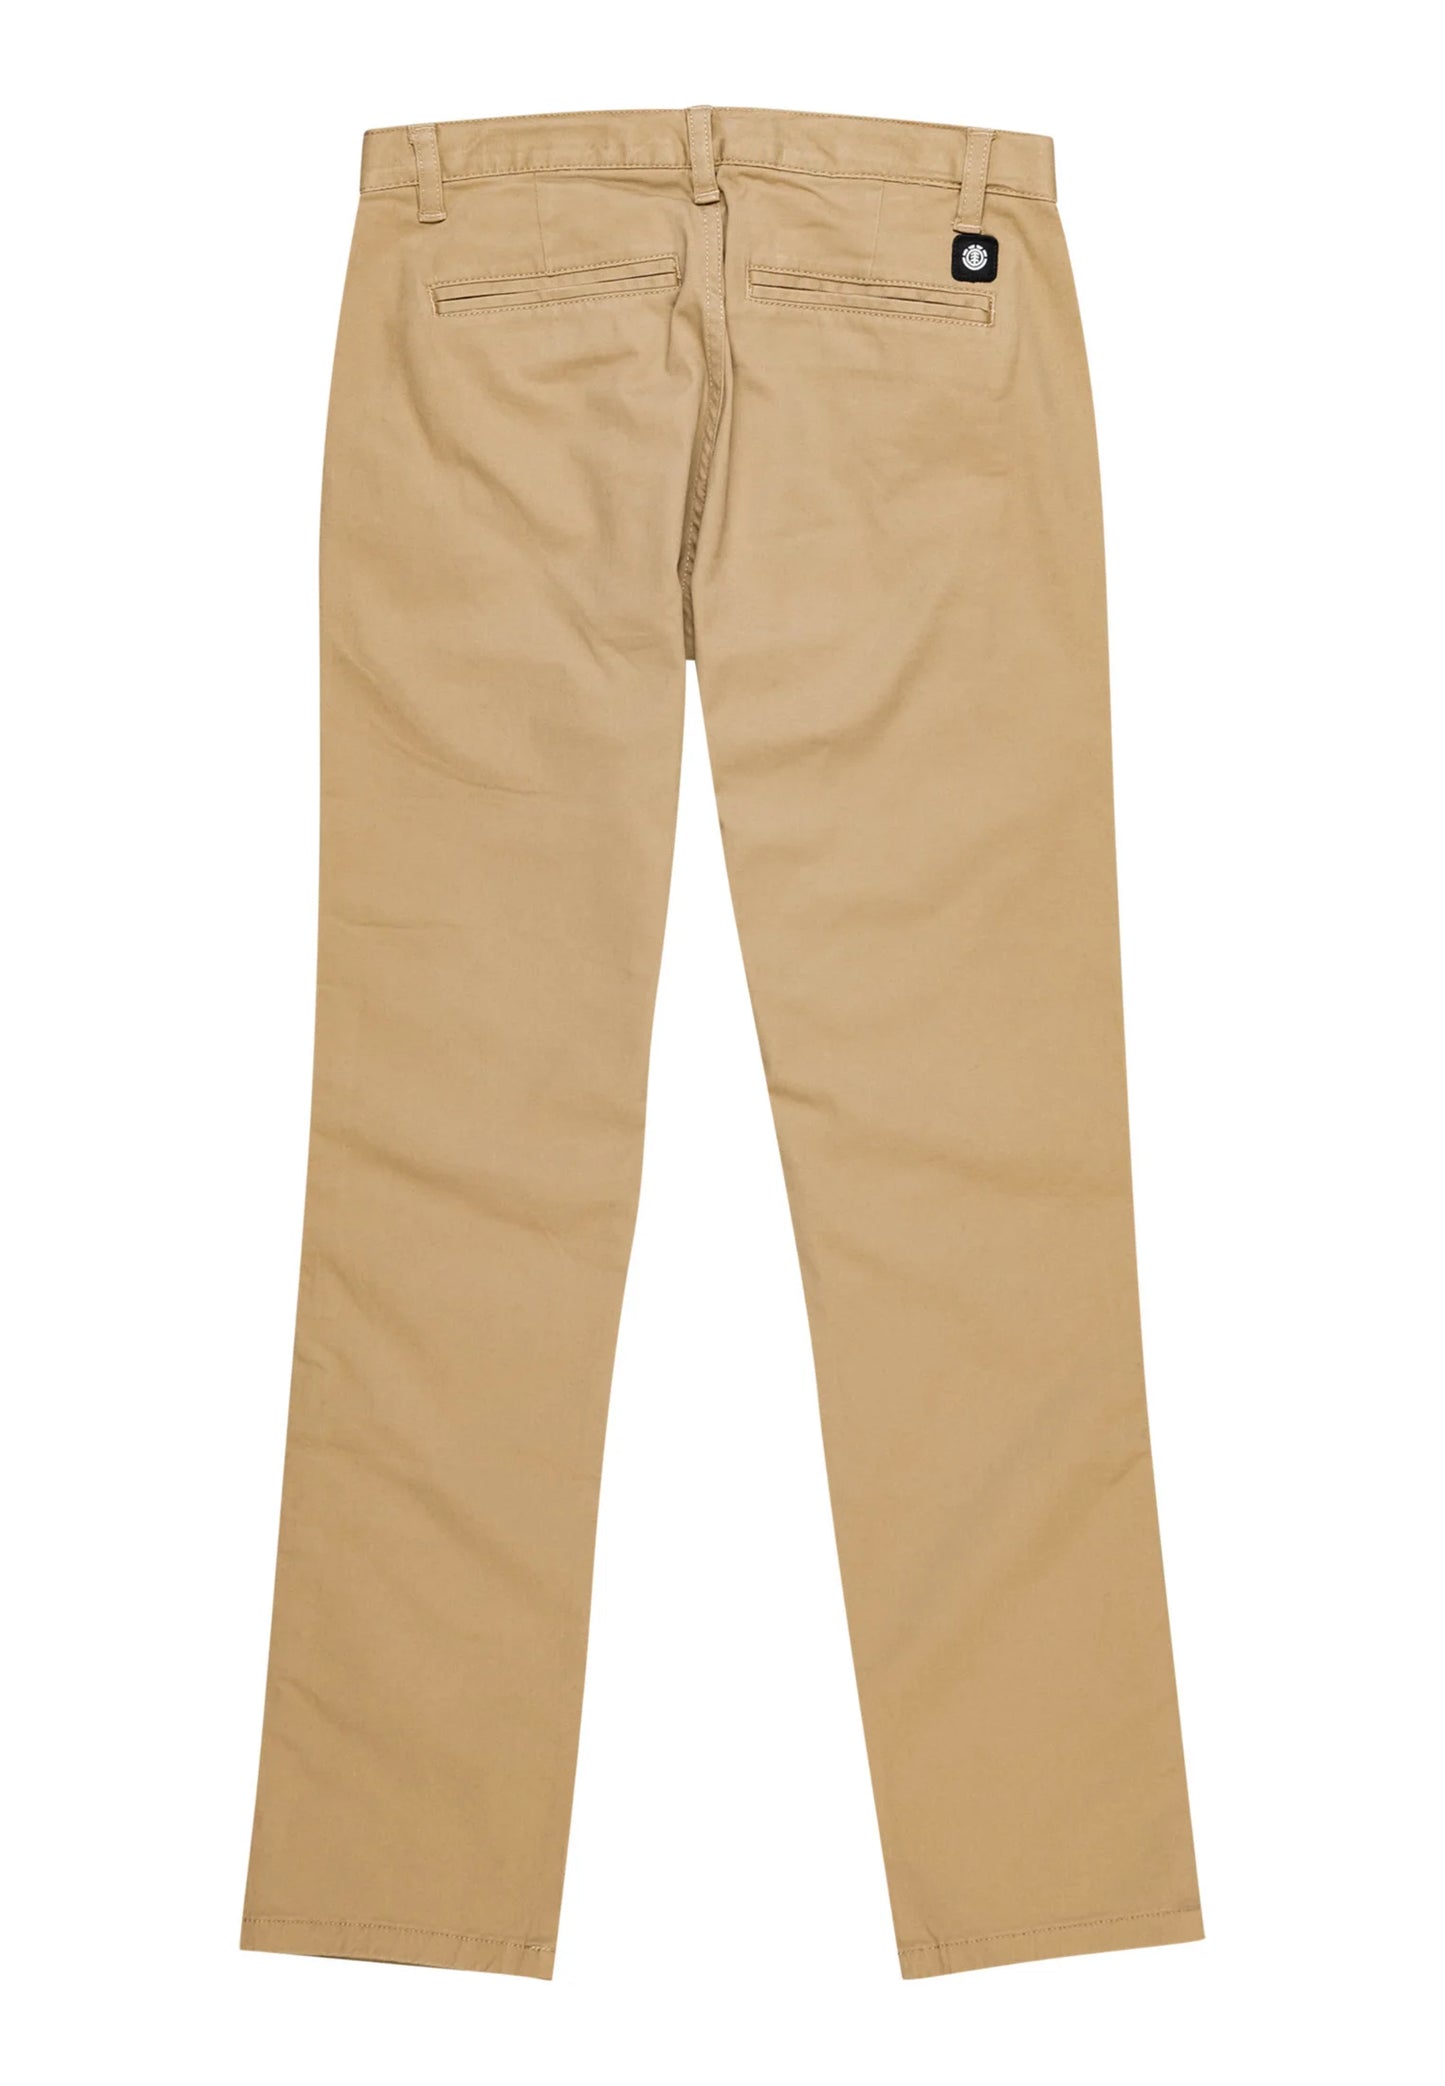 ELEMENT - HOWLAND CLASSIC CHINO YOUTH - BEIGE